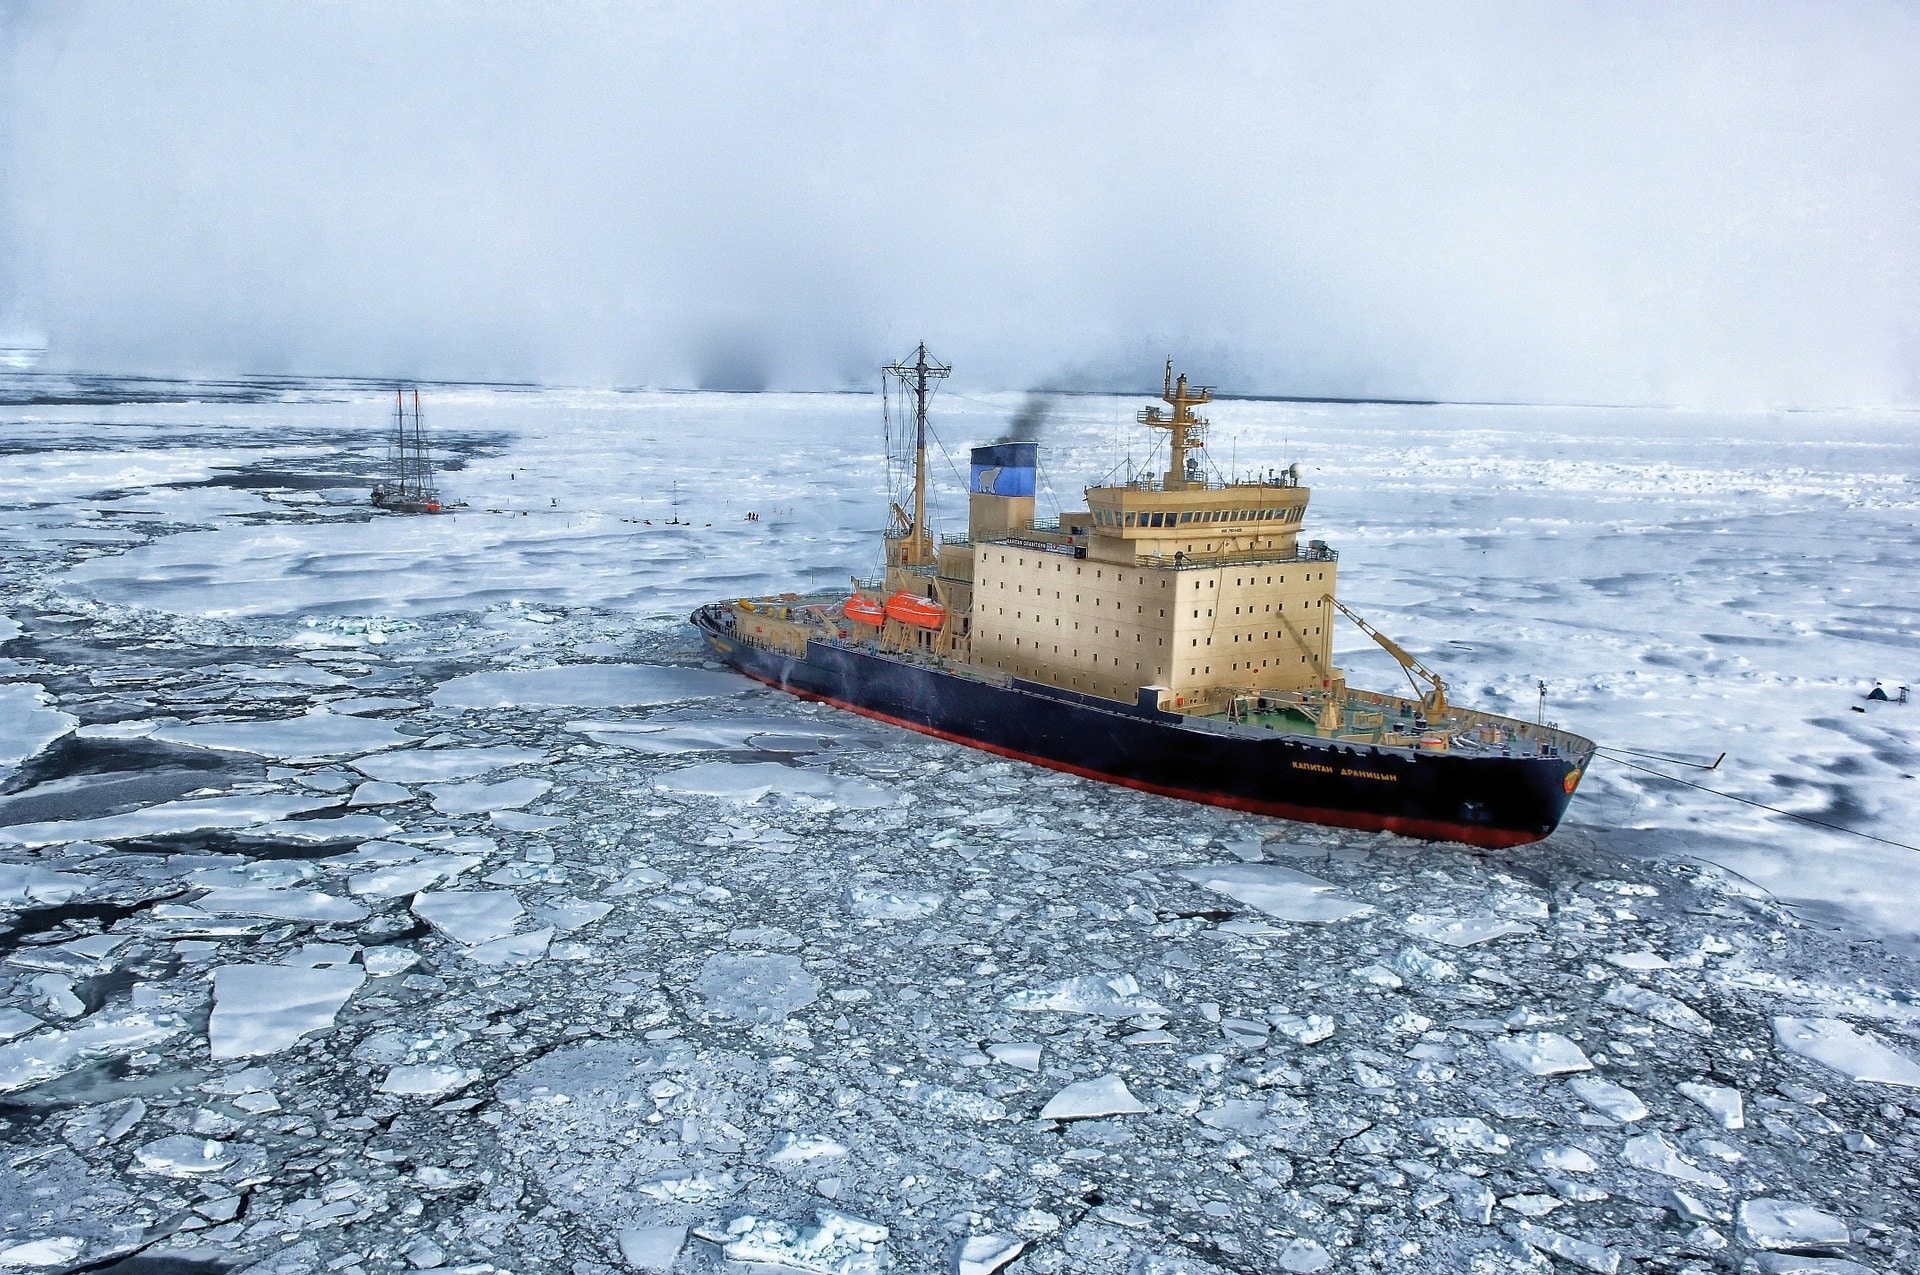 The foreseeable end of vessel heavy fuel oil use in the Arctic